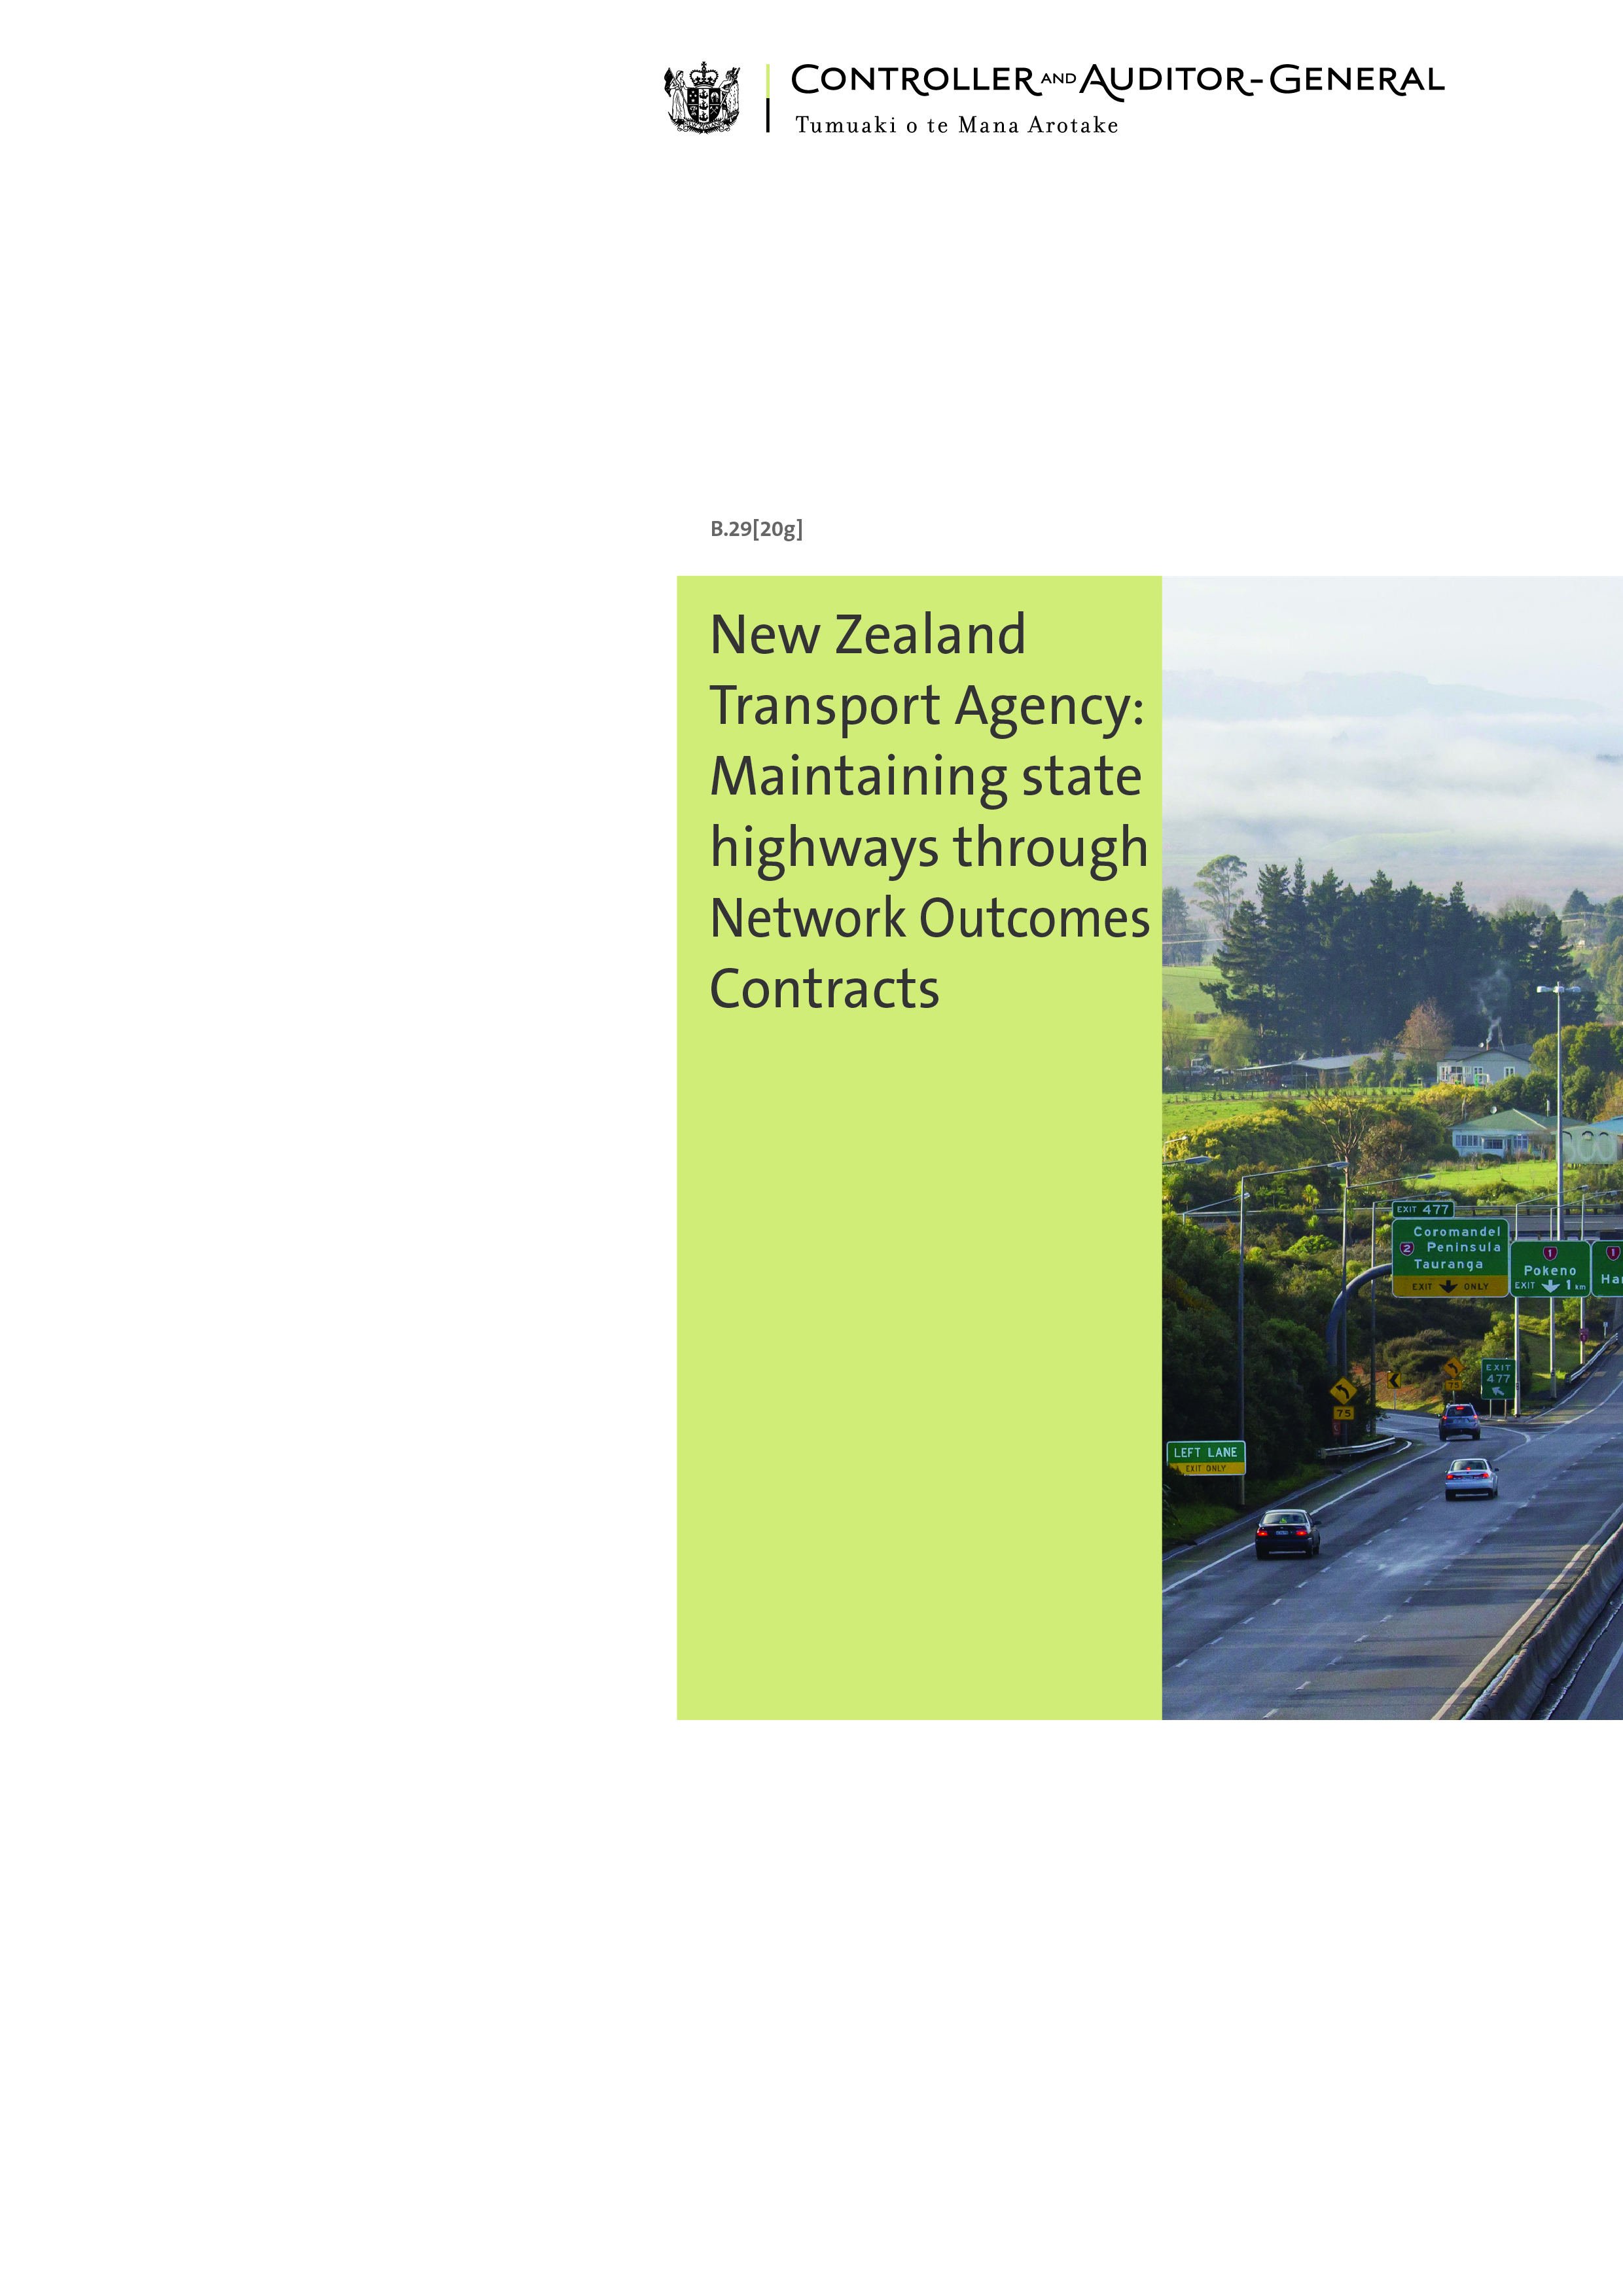 Cover of New Zealand Transport Agency: Maintaining state highways through Network Outcomes Contracts.